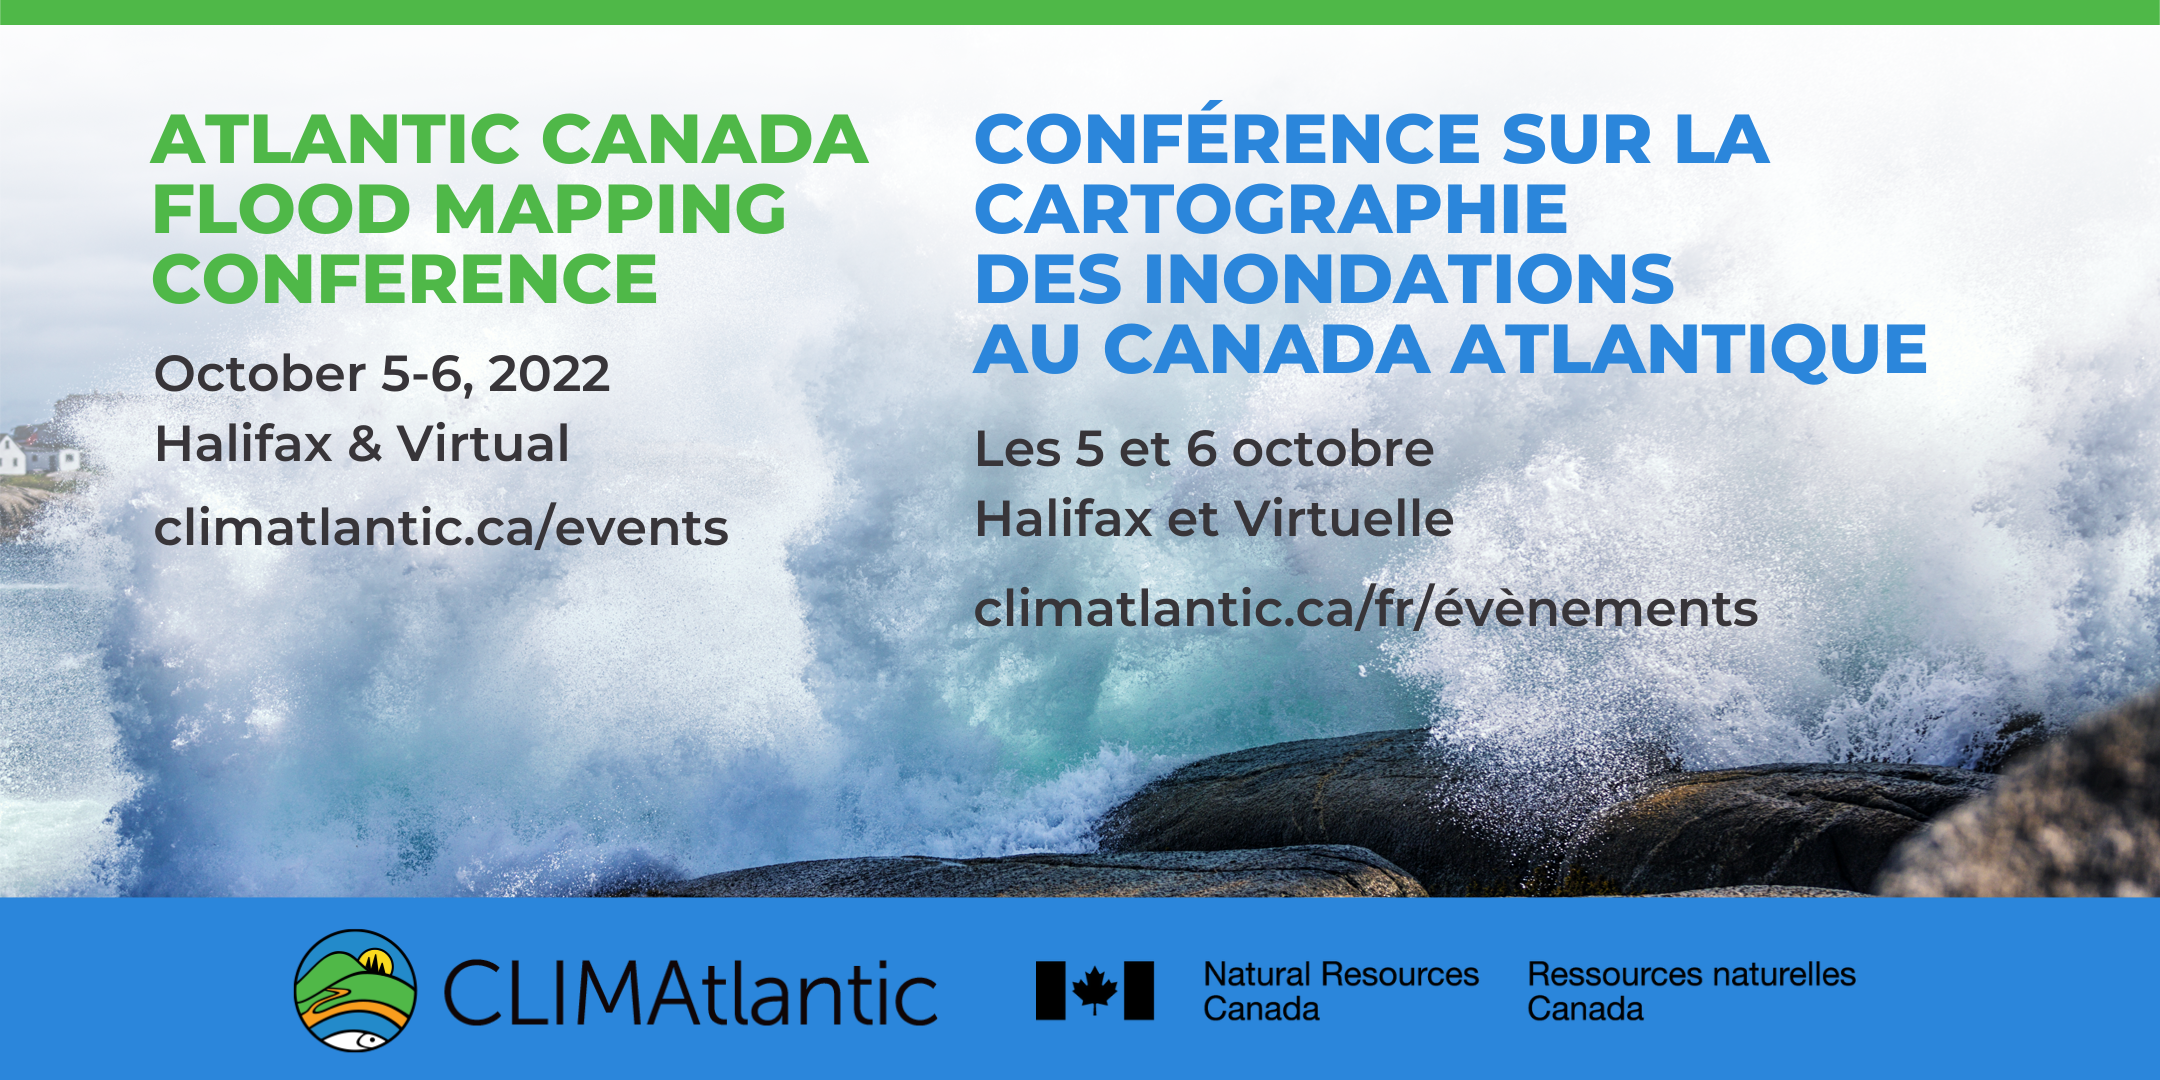 Event banner for the Atlantic Canada Flood Mapping Conference by CLIMAtlantic and NRCAN, which took place in October 2022.